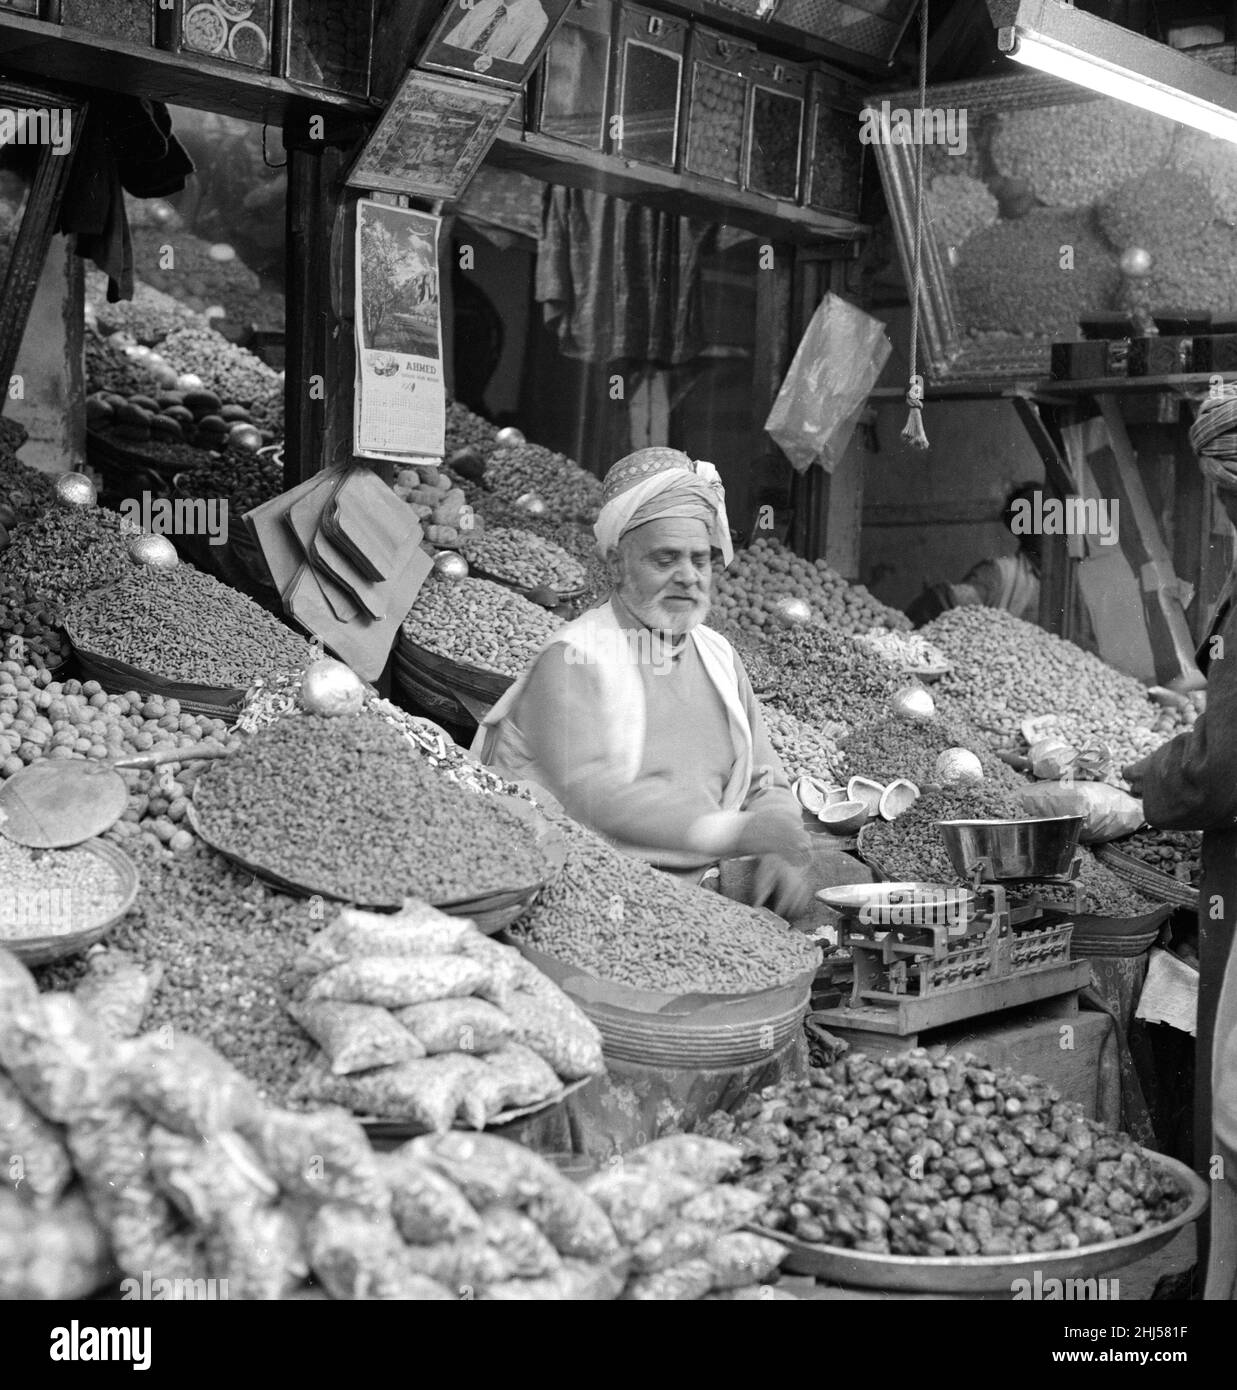 Trader in vegetables and spices sits outside his shop in Peshawar the capital of the North West Frontier province of Pakistan. February 1961  l Stock Photo